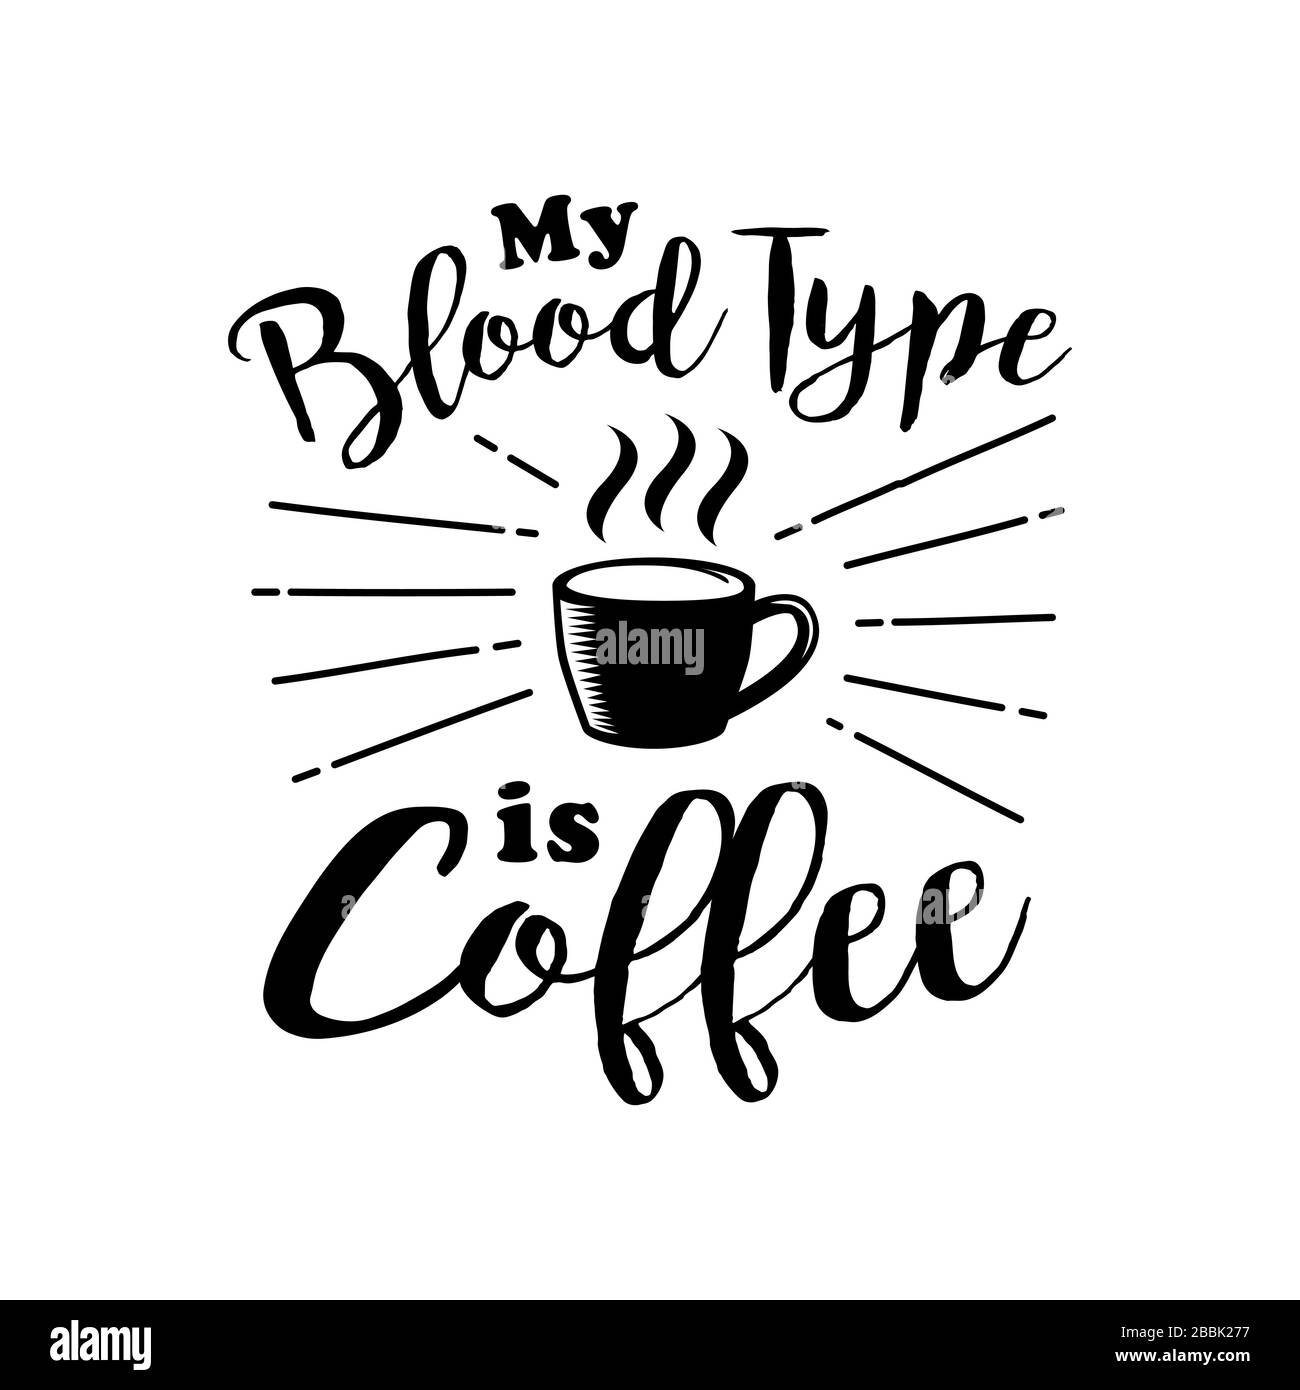 Coffee Quote and Saying. My blood type is coffee Stock Vector